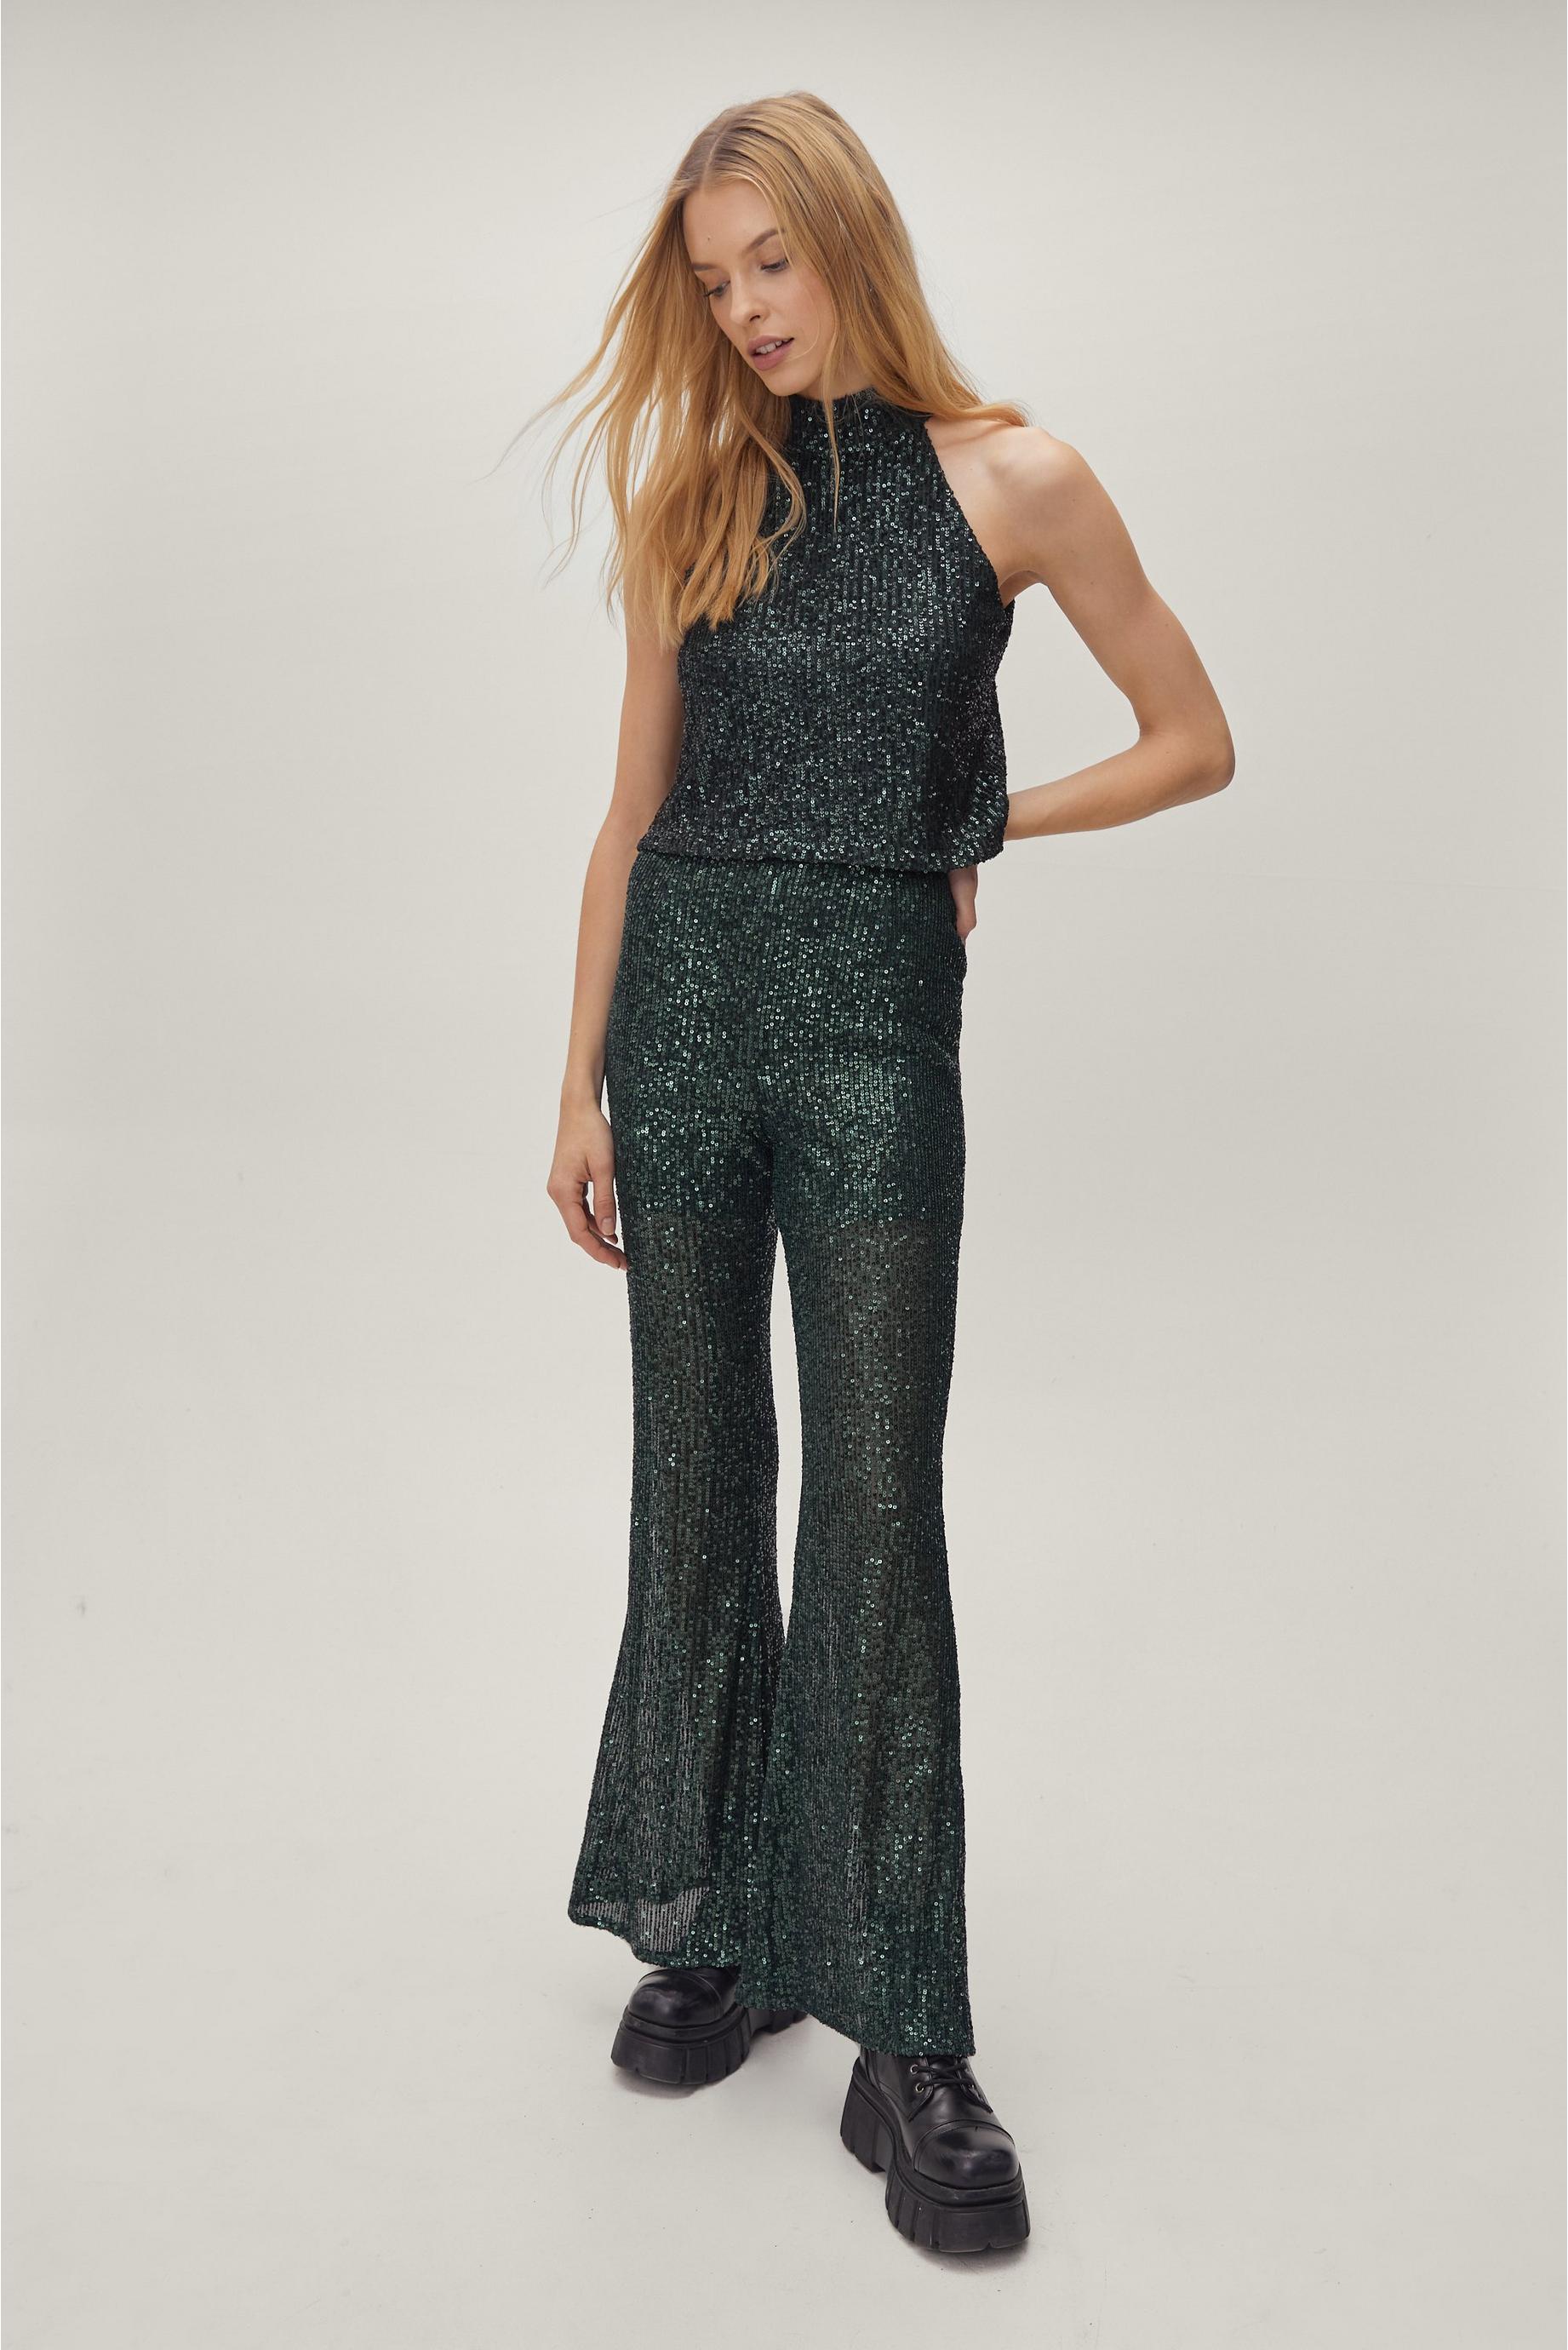 Sequin High Waisted Flared Pants